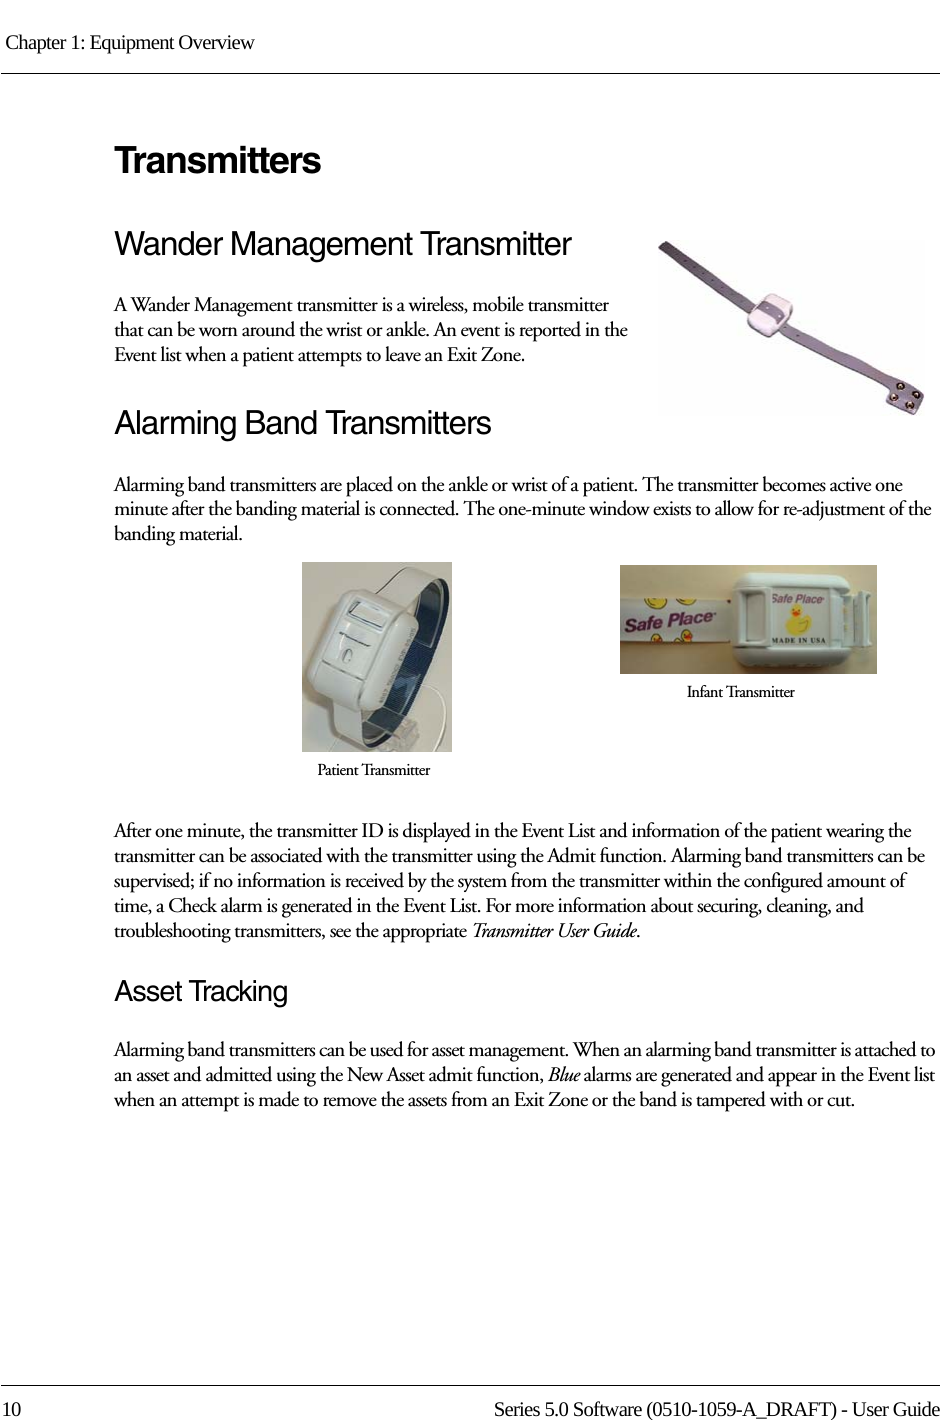 Chapter 1: Equipment Overview 10 Series 5.0 Software (0510-1059-A_DRAFT) - User GuideTransmittersWander Management TransmitterA Wander Management transmitter is a wireless, mobile transmitter that can be worn around the wrist or ankle. An event is reported in the Event list when a patient attempts to leave an Exit Zone.Alarming Band TransmittersAlarming band transmitters are placed on the ankle or wrist of a patient. The transmitter becomes active one minute after the banding material is connected. The one-minute window exists to allow for re-adjustment of the banding material. After one minute, the transmitter ID is displayed in the Event List and information of the patient wearing the transmitter can be associated with the transmitter using the Admit function. Alarming band transmitters can be supervised; if no information is received by the system from the transmitter within the configured amount of time, a Check alarm is generated in the Event List. For more information about securing, cleaning, and troubleshooting transmitters, see the appropriate Transmitter User Guide. Asset TrackingAlarming band transmitters can be used for asset management. When an alarming band transmitter is attached to an asset and admitted using the New Asset admit function, Blue alarms are generated and appear in the Event list when an attempt is made to remove the assets from an Exit Zone or the band is tampered with or cut.Infant TransmitterPatient Transmitter